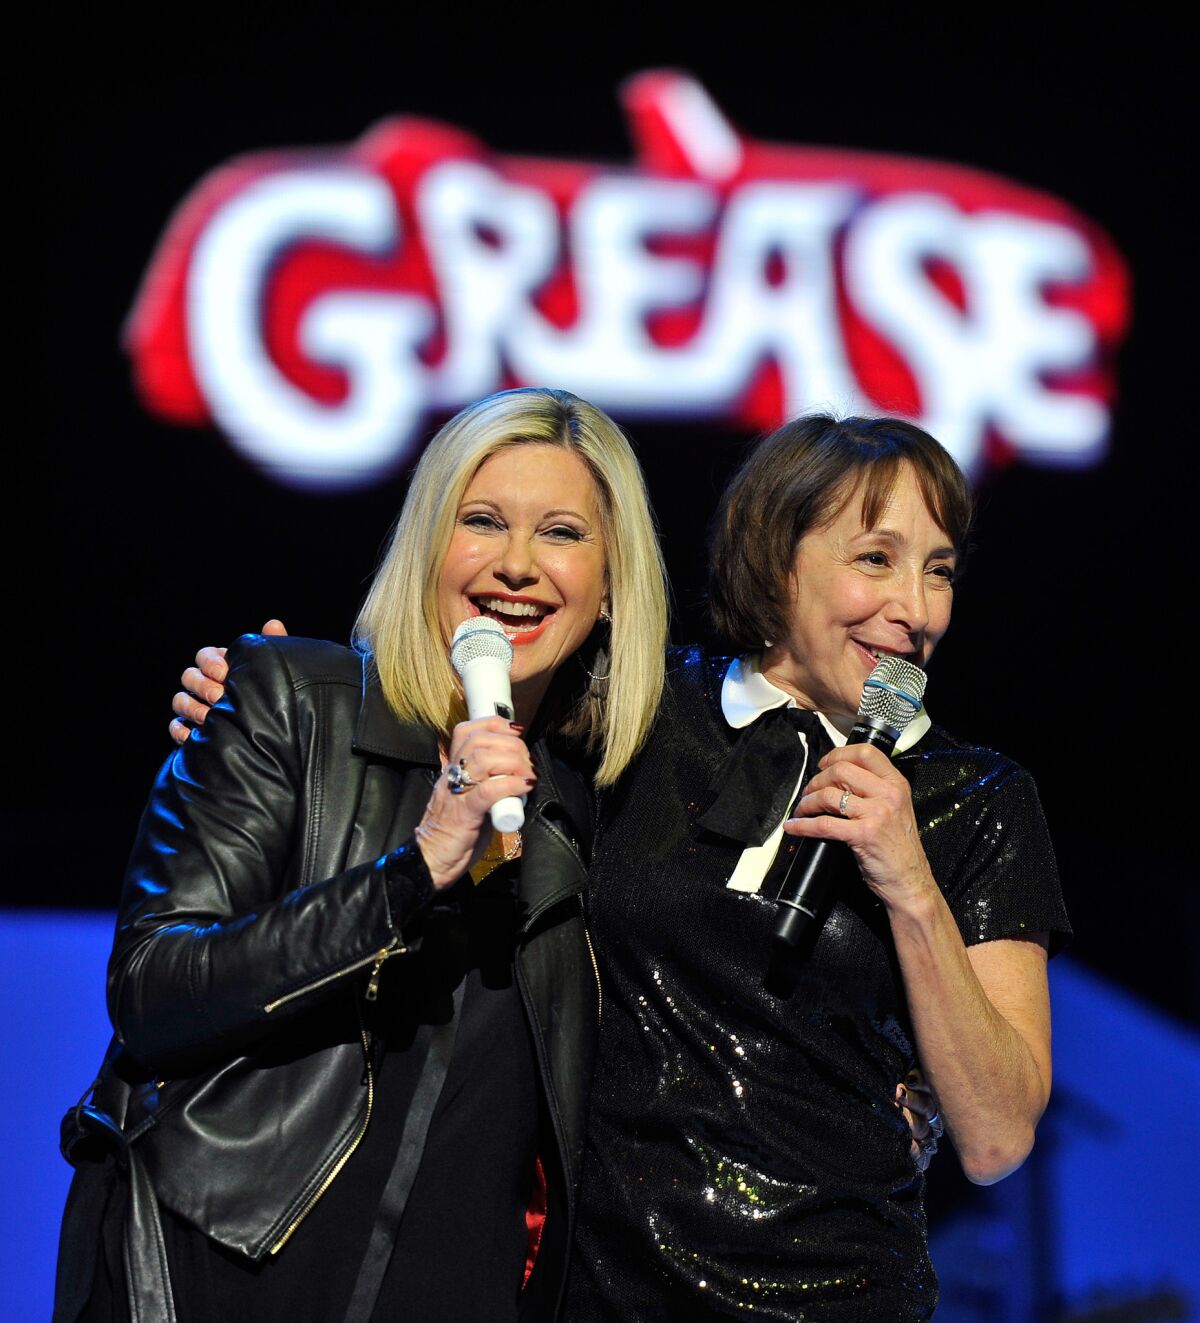 Together again: Olivia Newton-John, left, and actress Didi Conn shared the stage Jan. 3 at the Flamingo Las Vegas. The two starred in the 1978 movie "Grease."